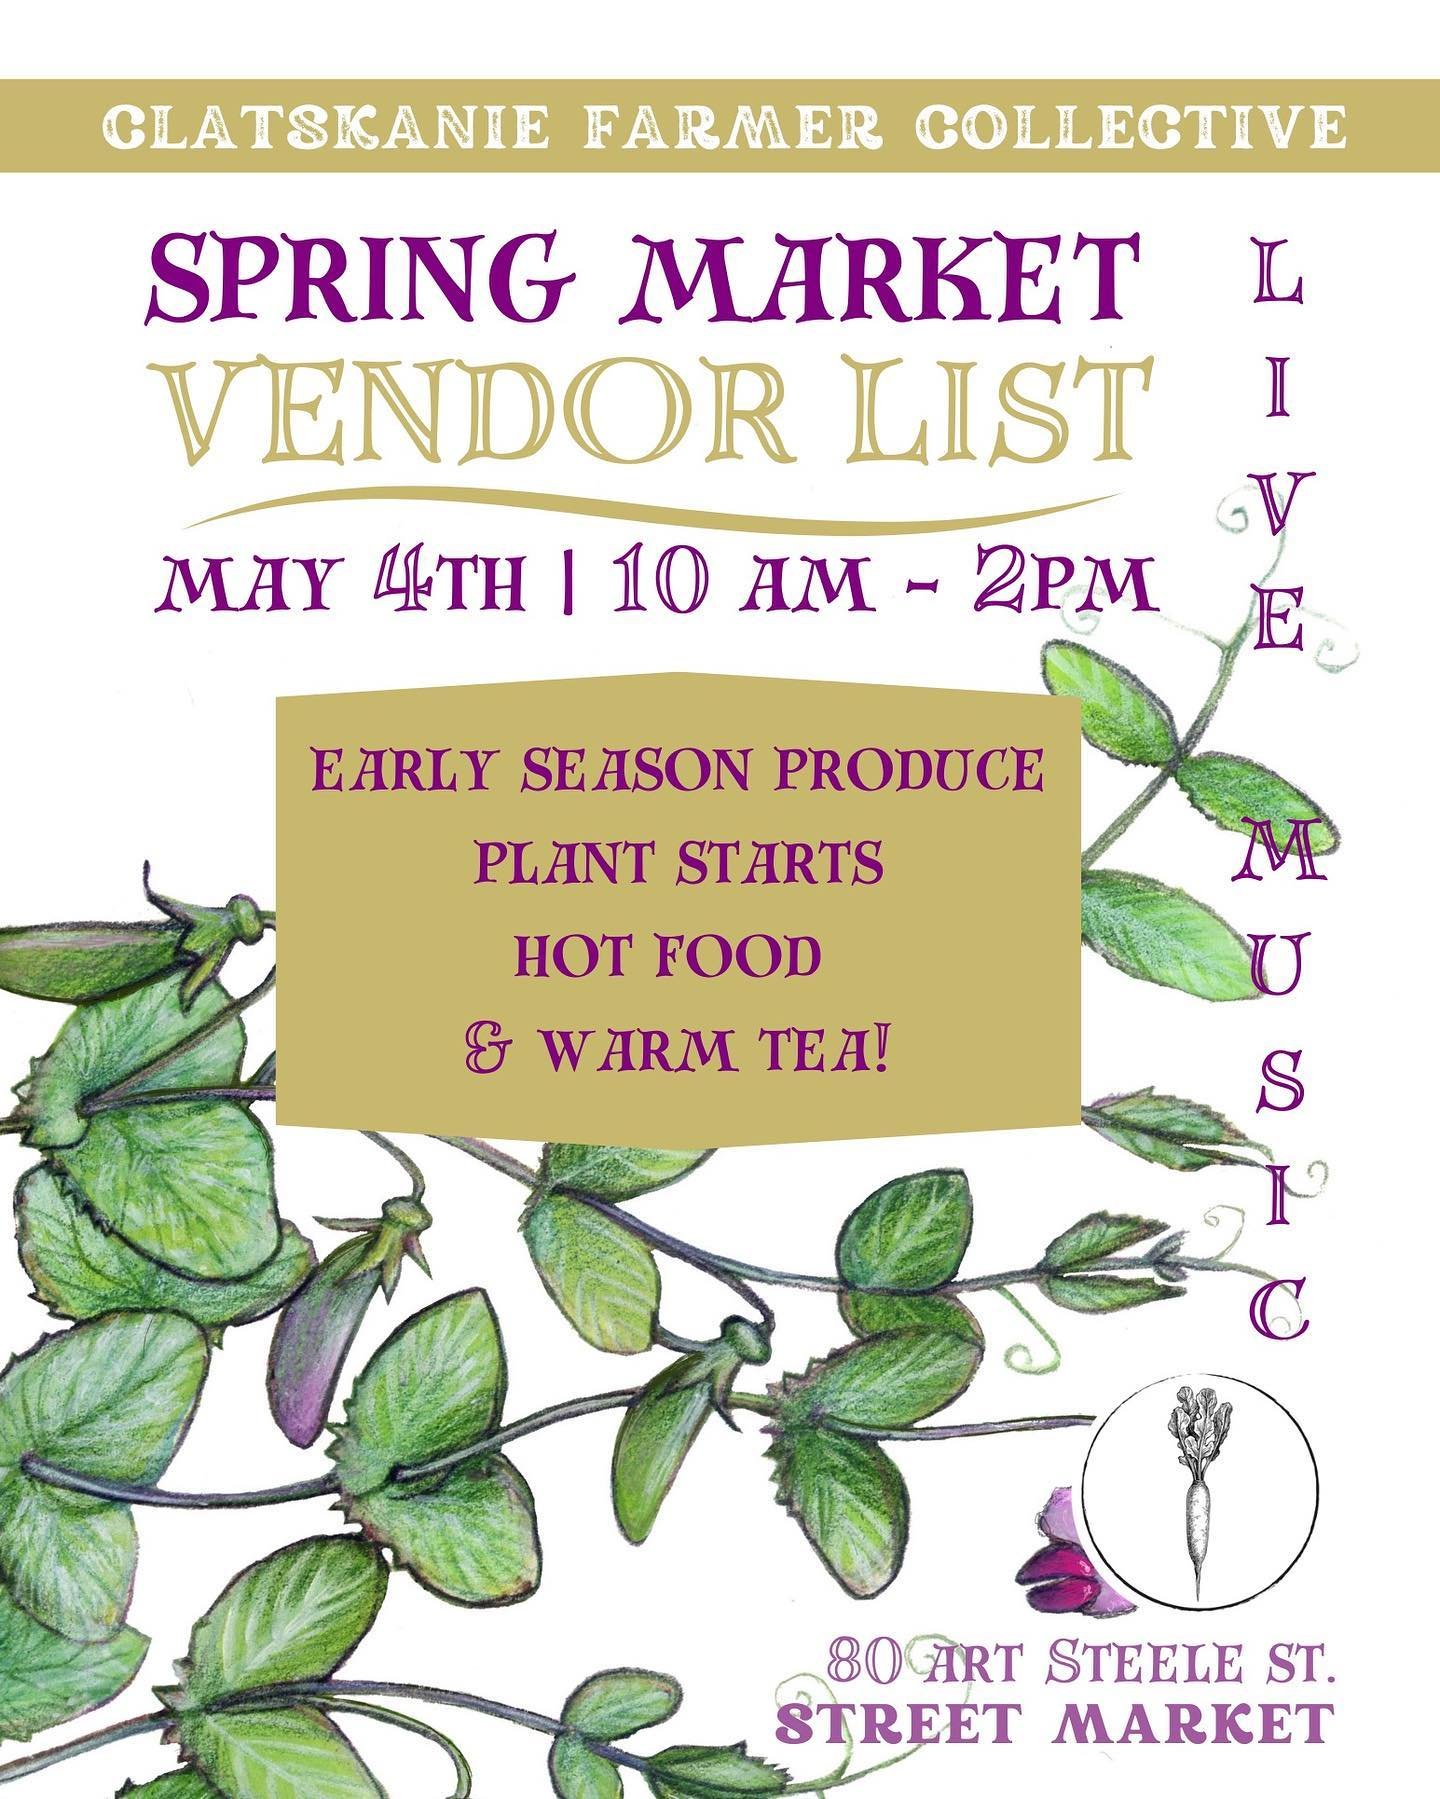 Last call for Spring Market vendors - deadline to apply is April 25th! Here is our current vendor list for May 4th, 10am - 2pm located on the street adjacent to the food hub 💜

- Remember to bring soil samples for @forest_aged mobile lab!
- The @the